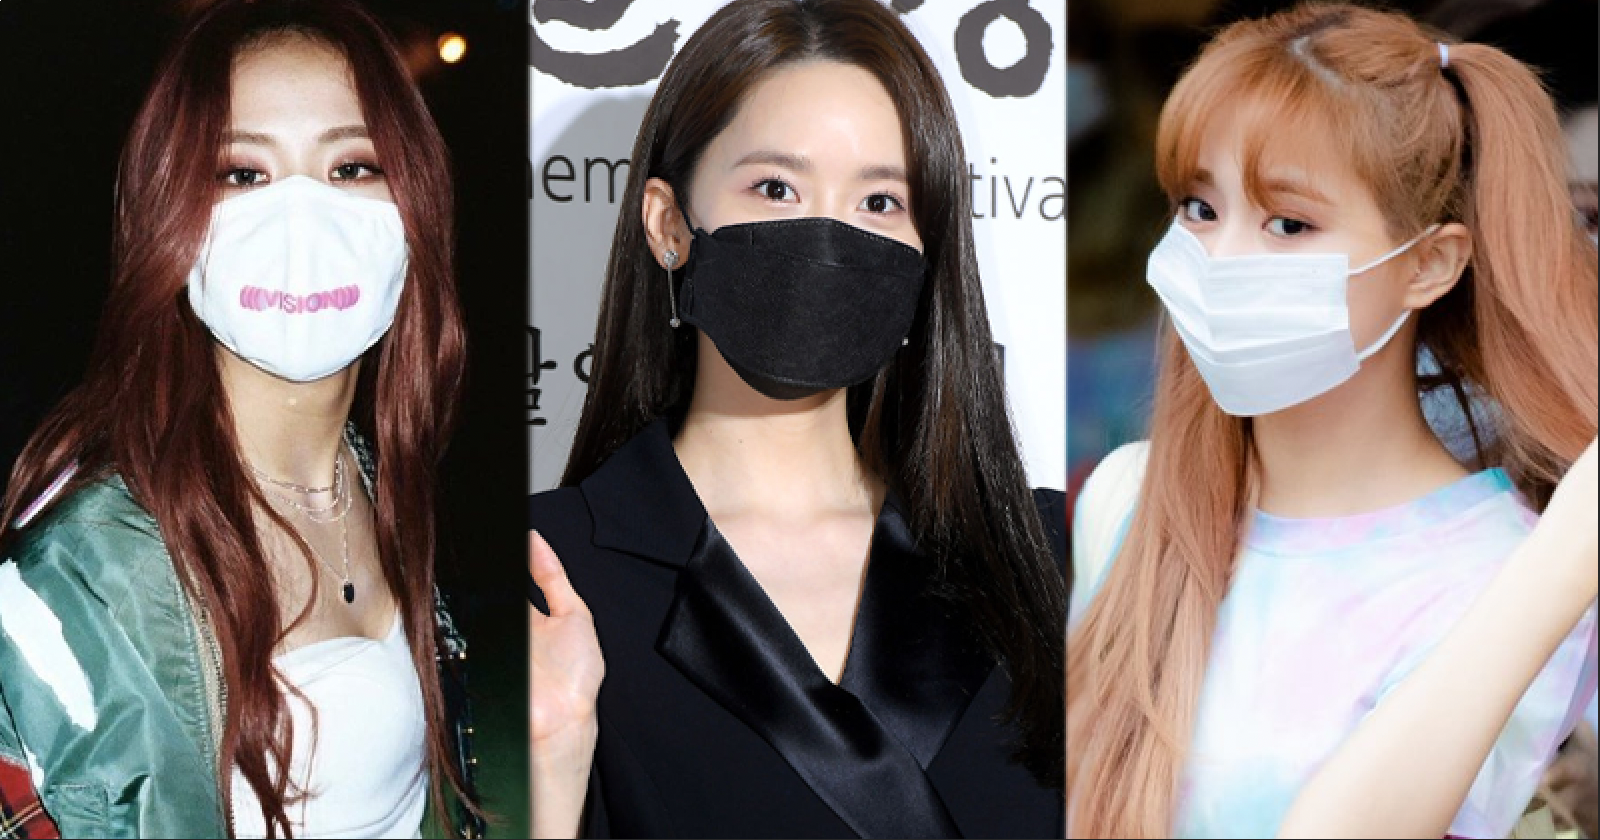 Top 10 Female Idols Who Look the Best While Wearing a Mask